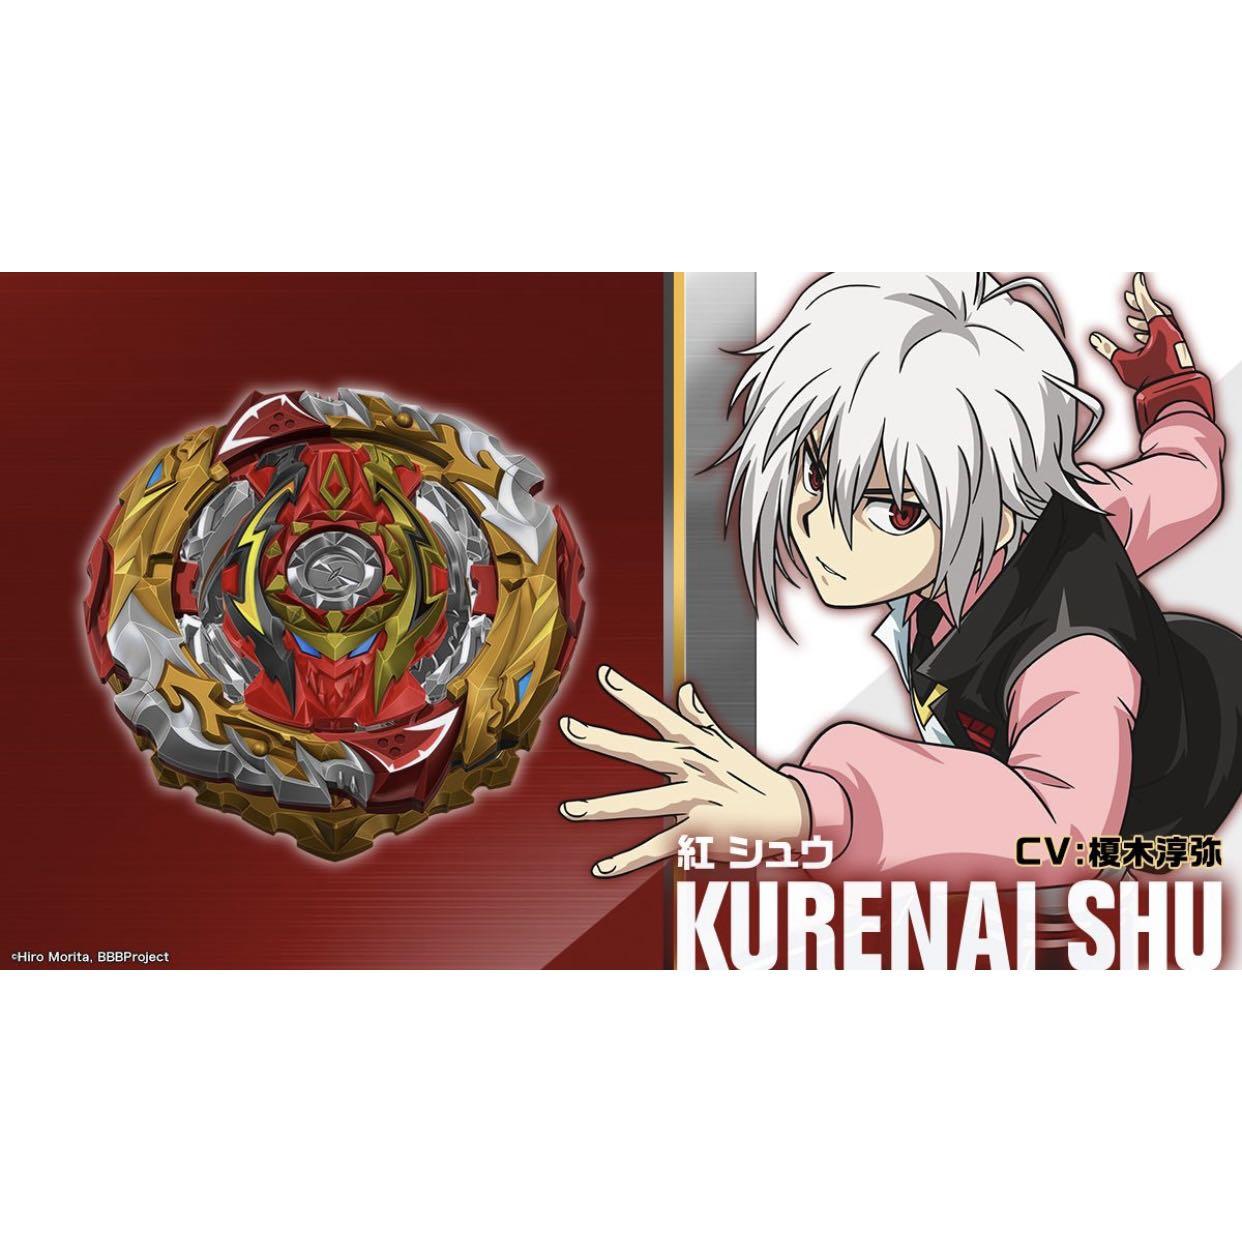 New Astral Spriggan Beyblade is Insane Plus Avatar is the best one ever    YouTube